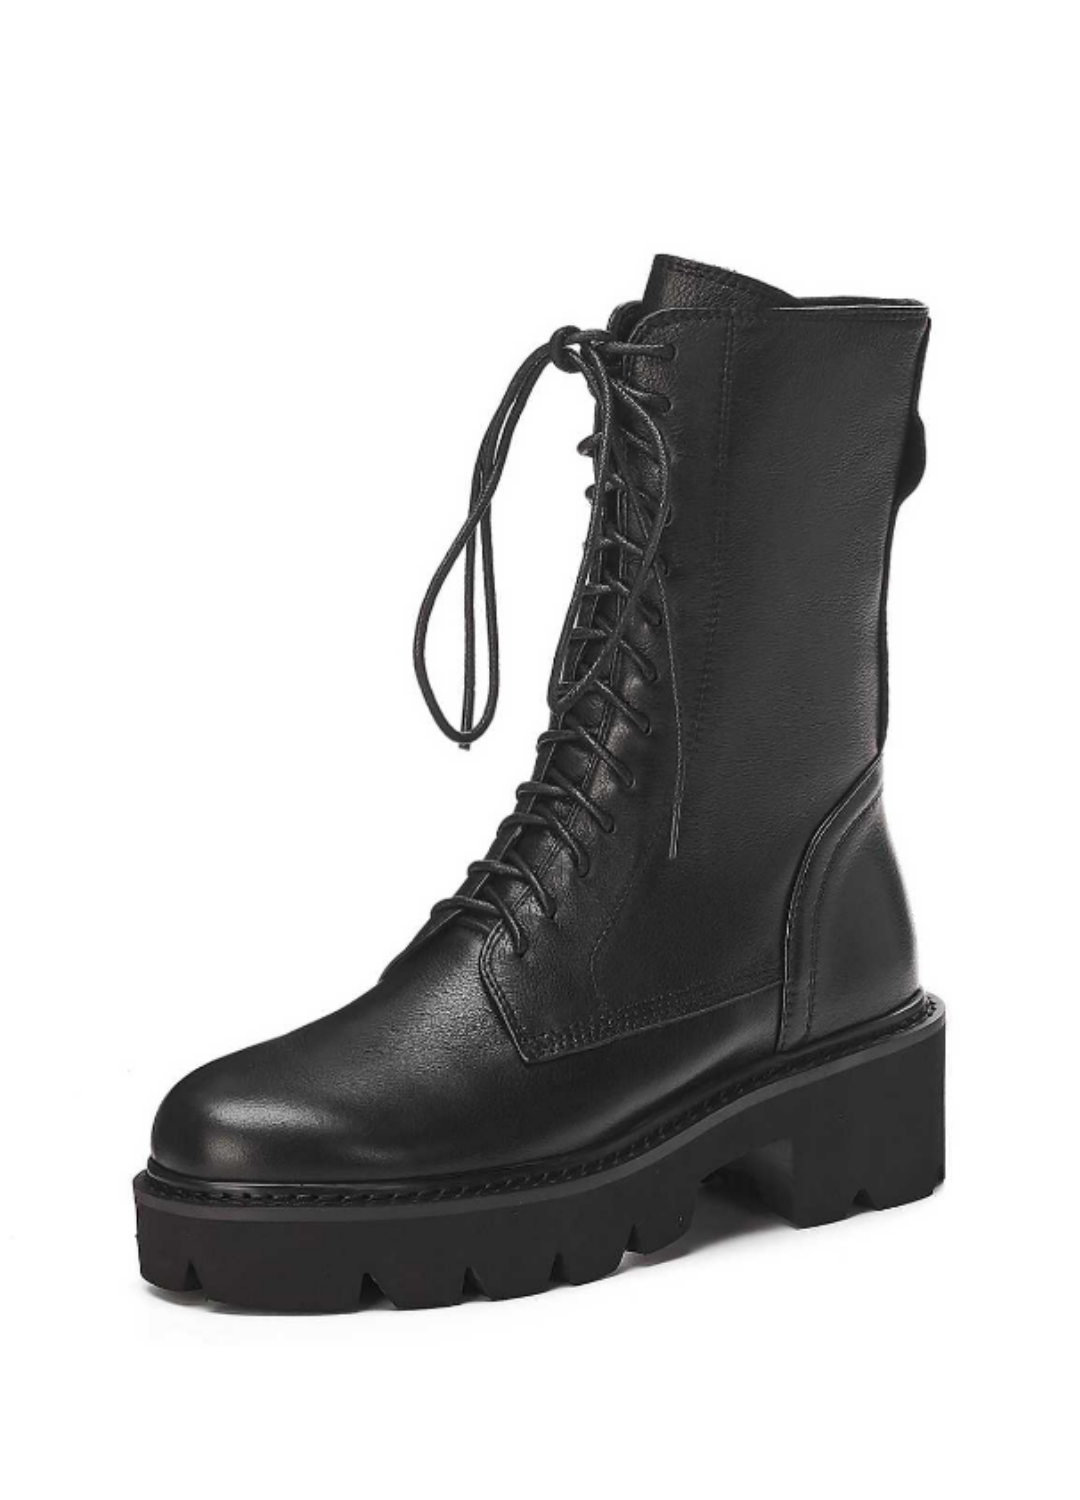 Golman Women's Leather Motorcycle Boots | Ultrasellershoes.com – USS® Shoes